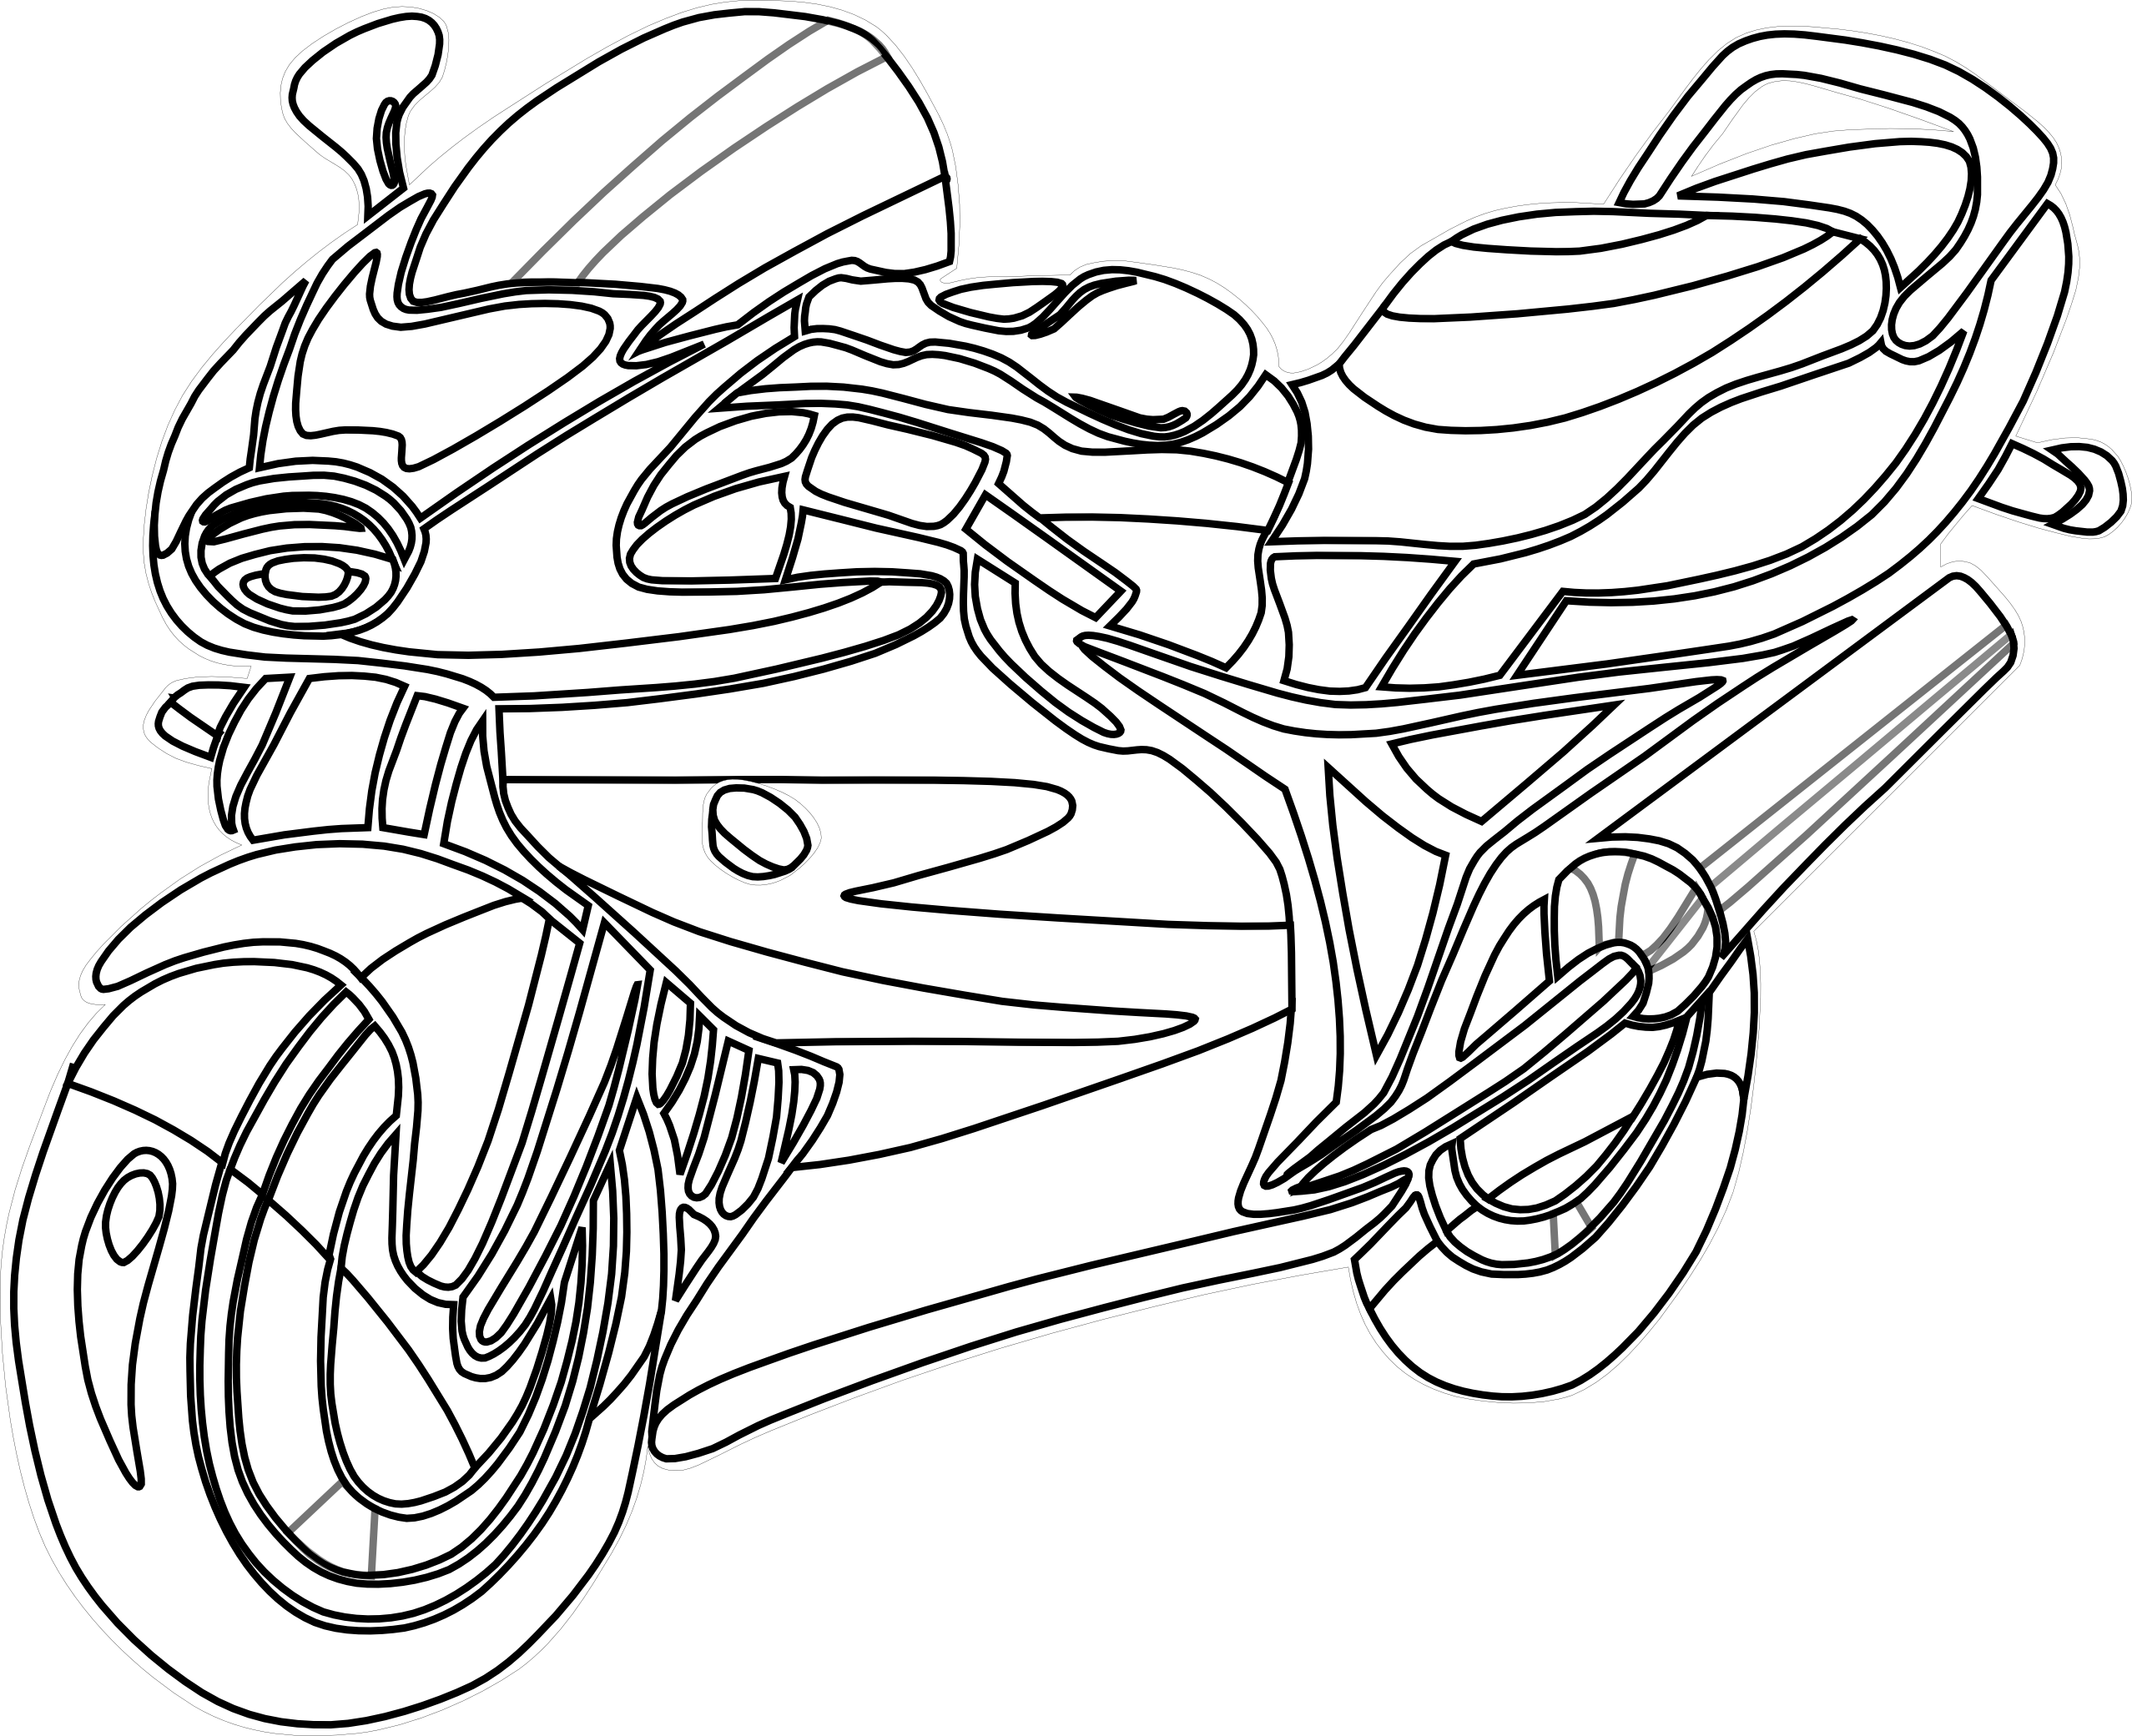 motorcycle clipart black white line art coloring ... - ClipArt ...